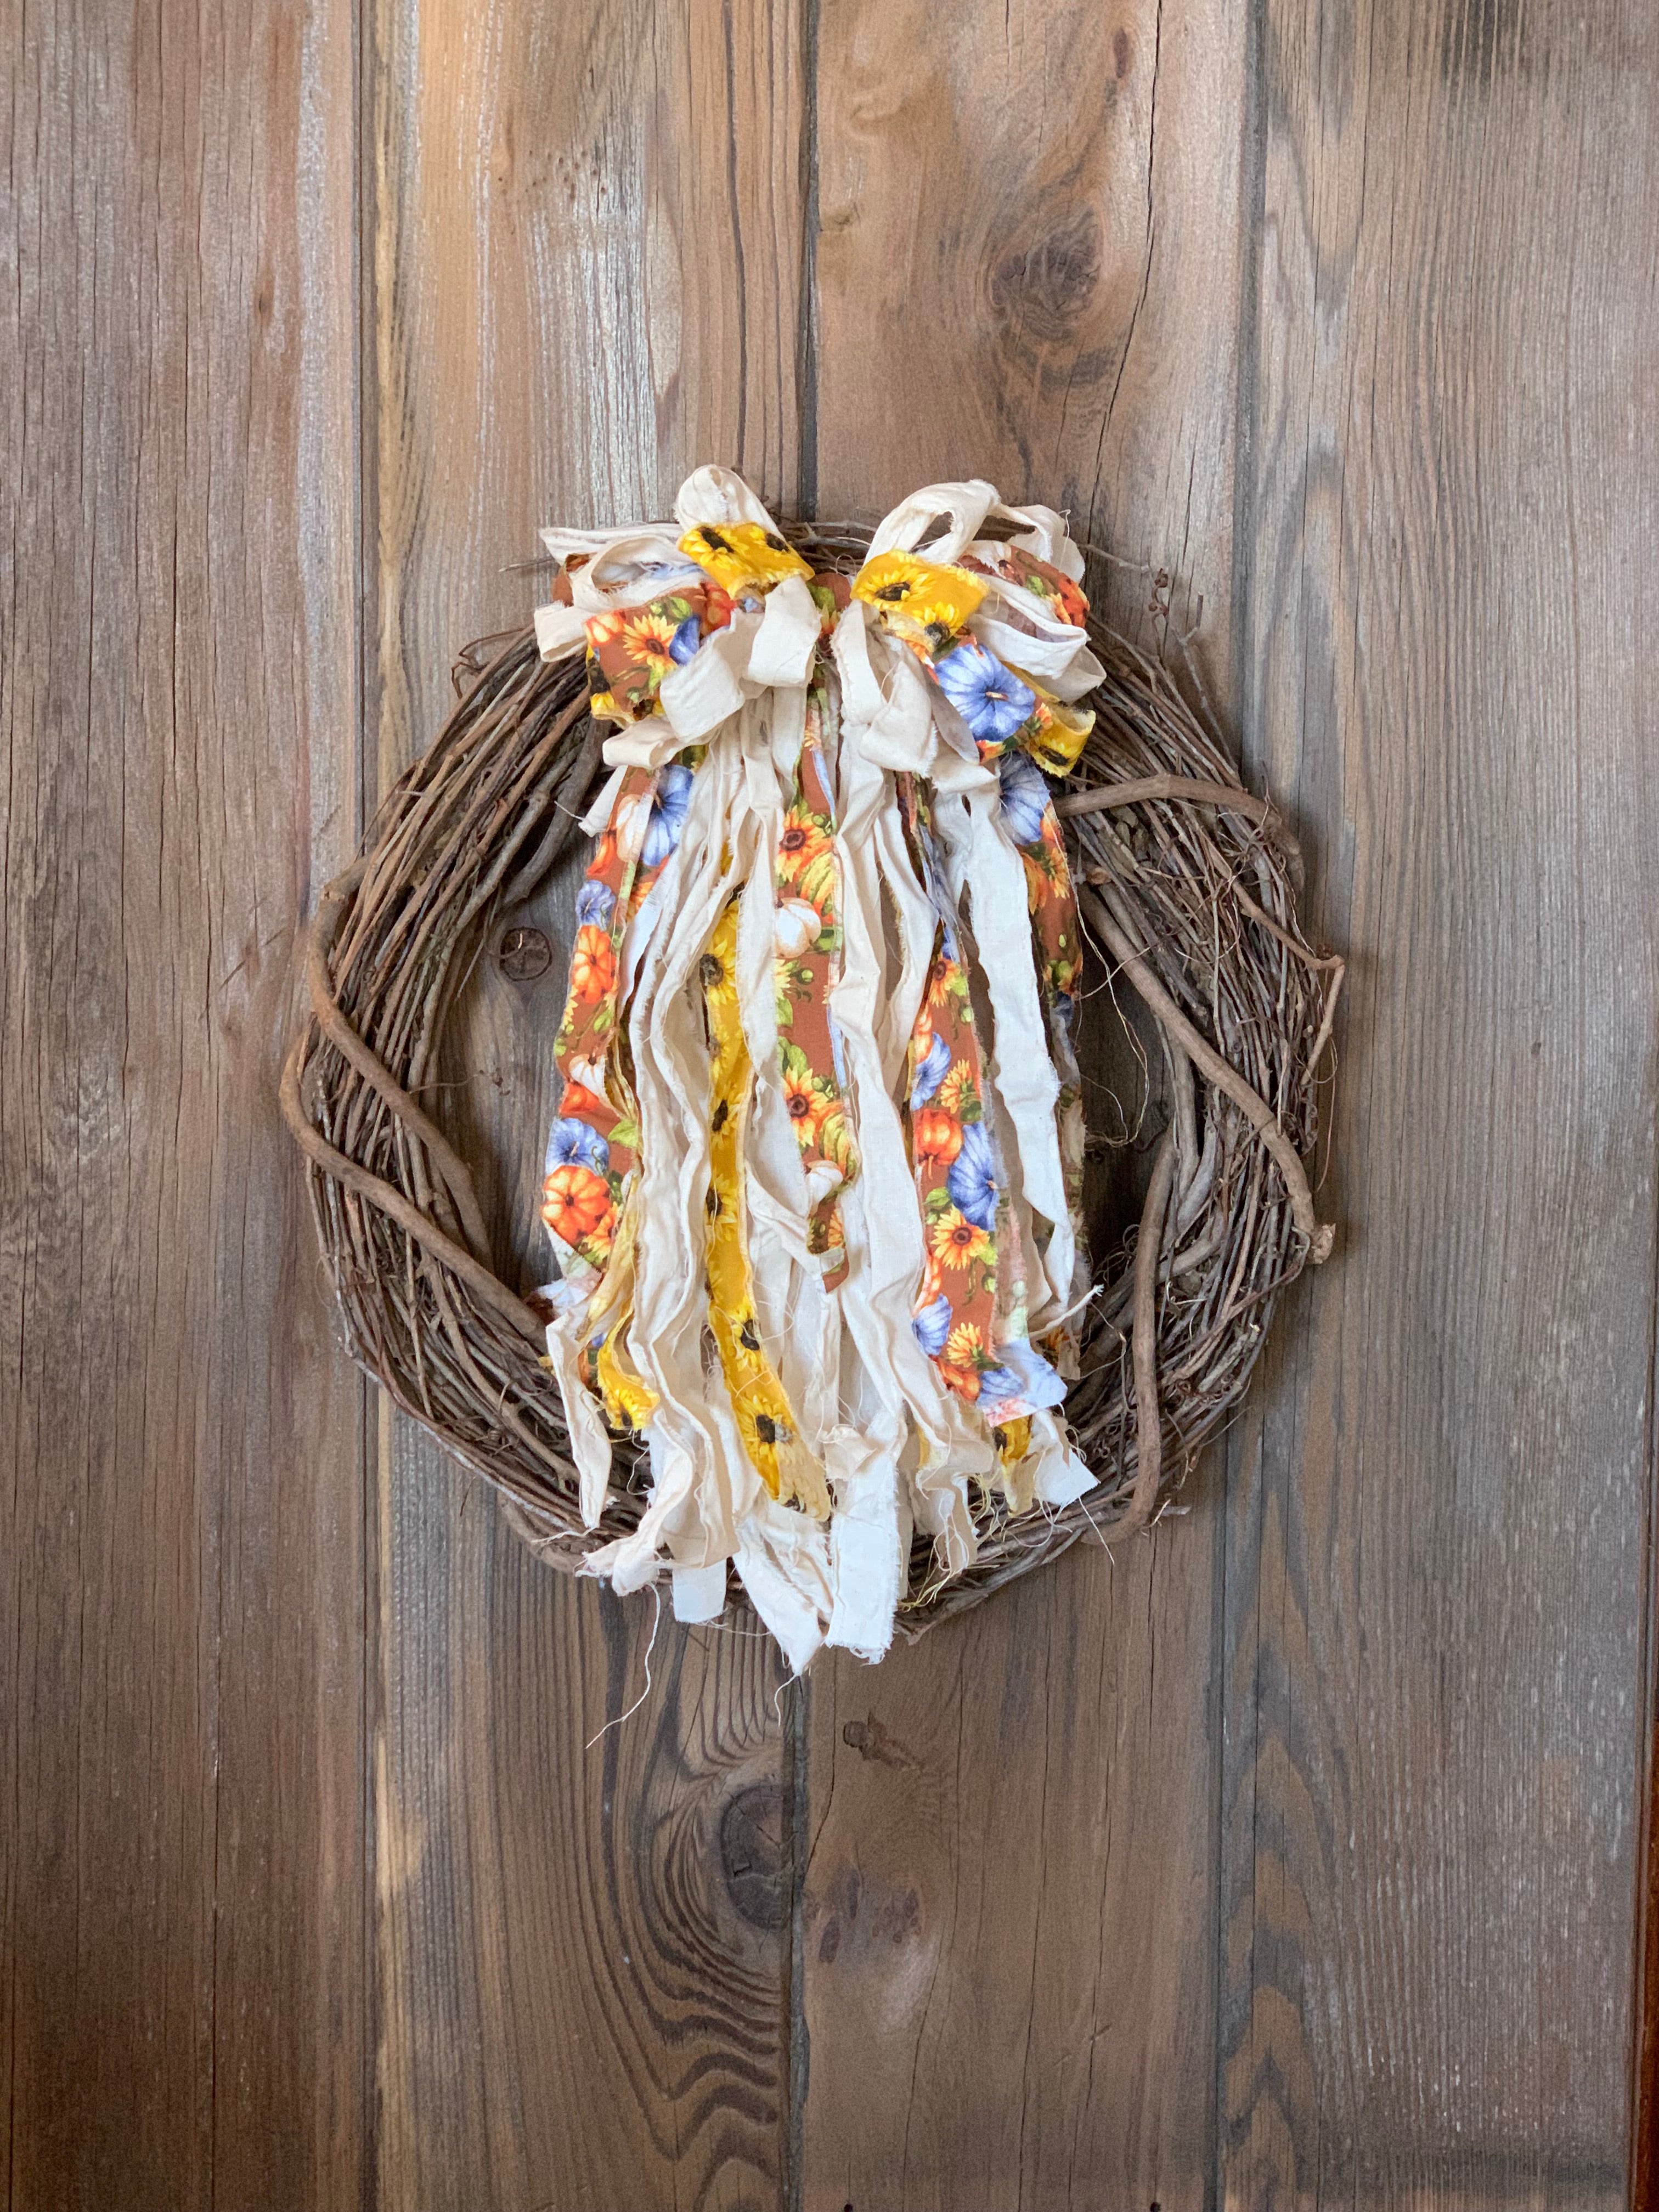 Fall Rag Bow in Natural, Sunflowers, & Pumpkins